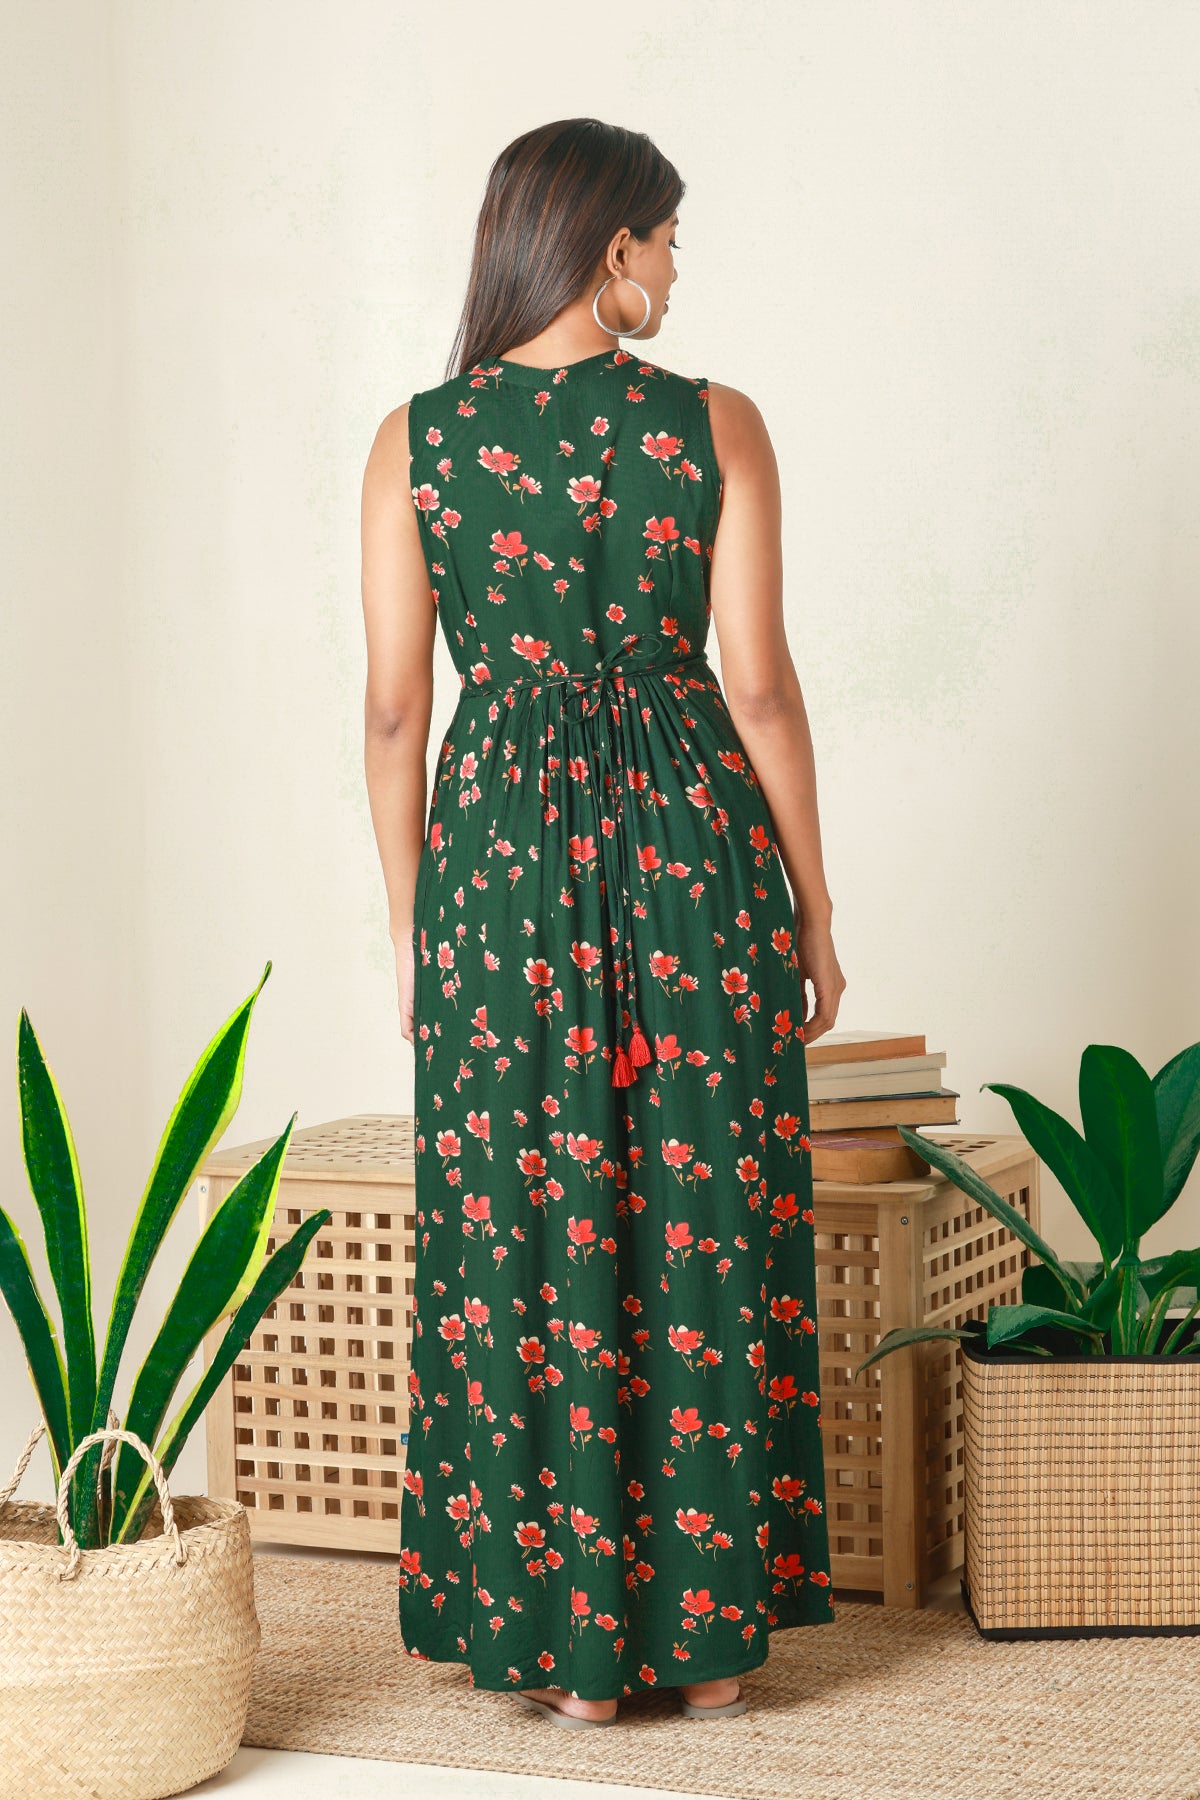 Contemporary Floral Printed Maternity Dress - Green